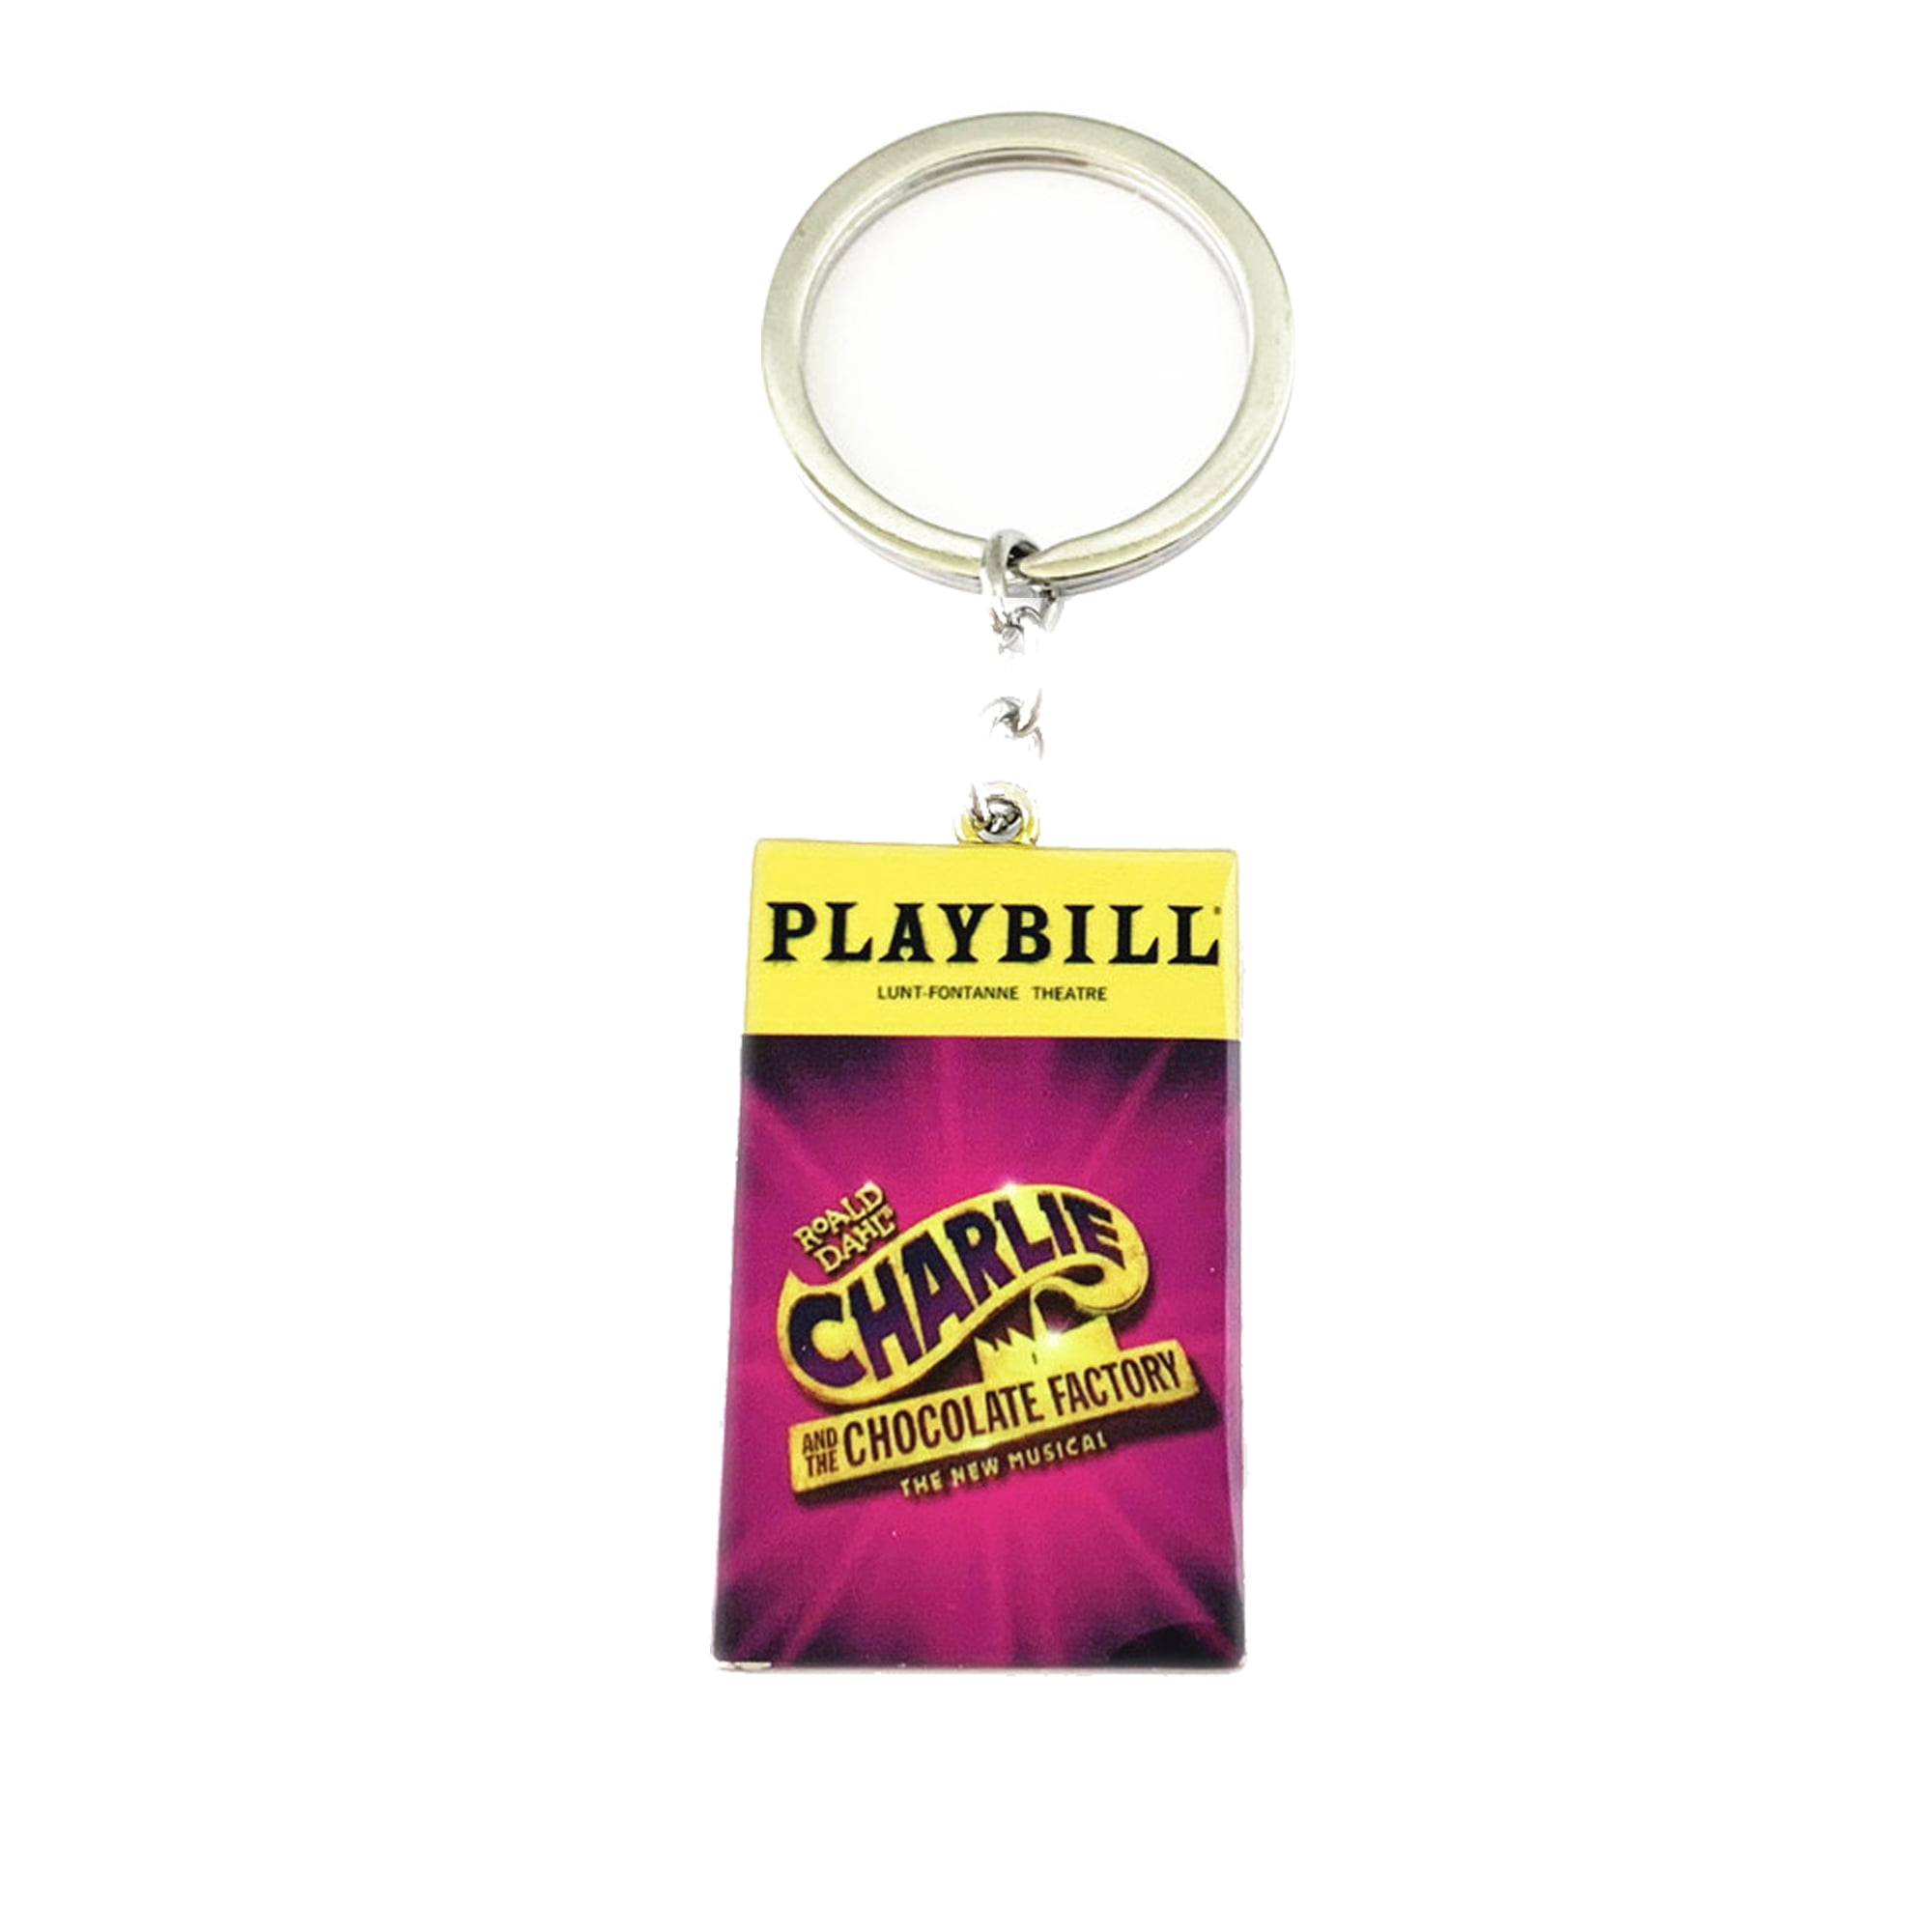 Charlie and the Chocolate Factory Broadway Musical Playbill Pendant  Keychain - Walmart.com